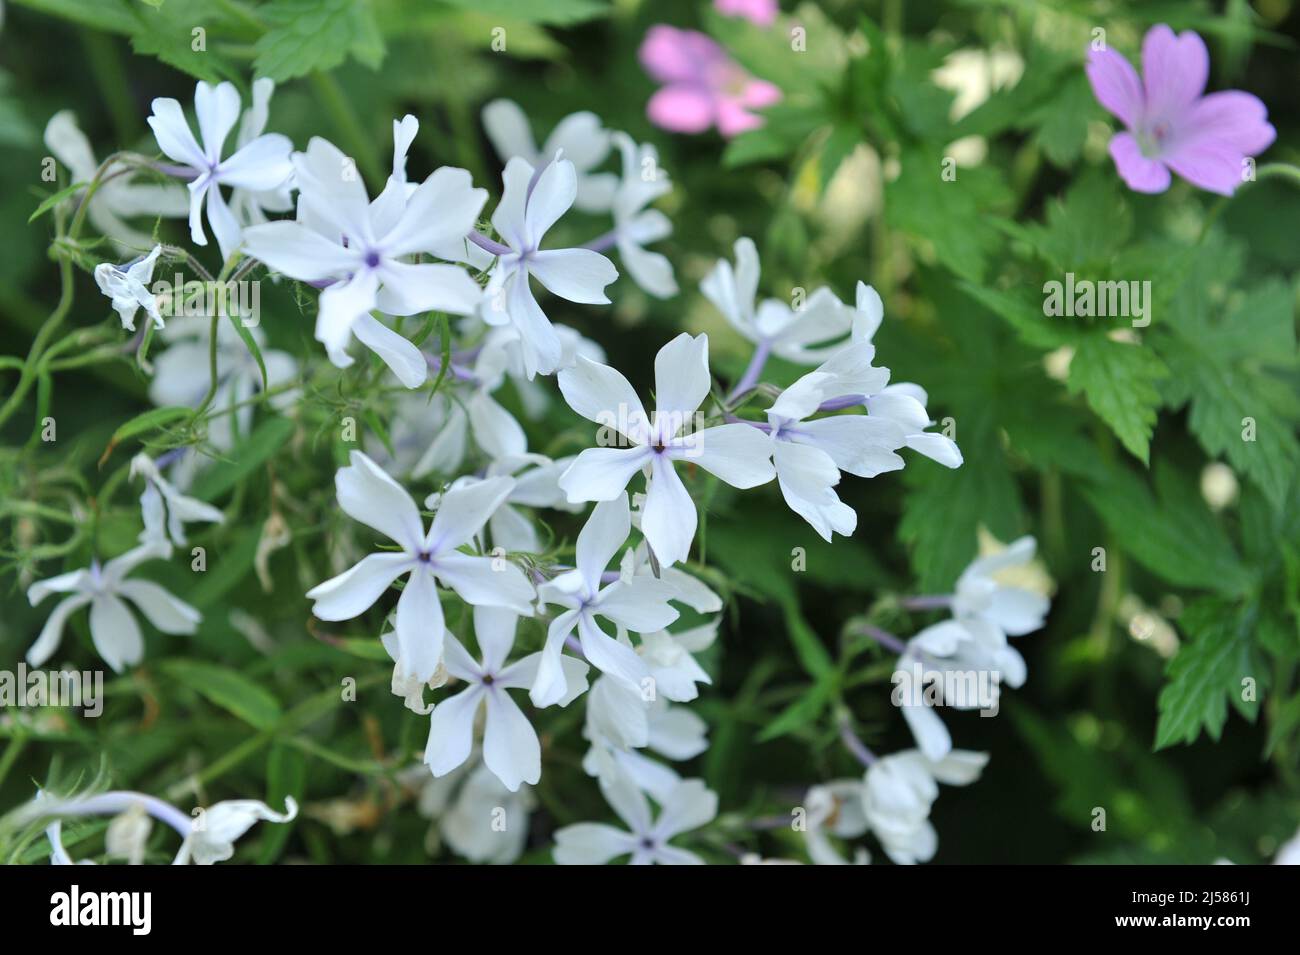 Sweet william (Phlox divaricata) White Perfume blooms in a garden in May Stock Photo